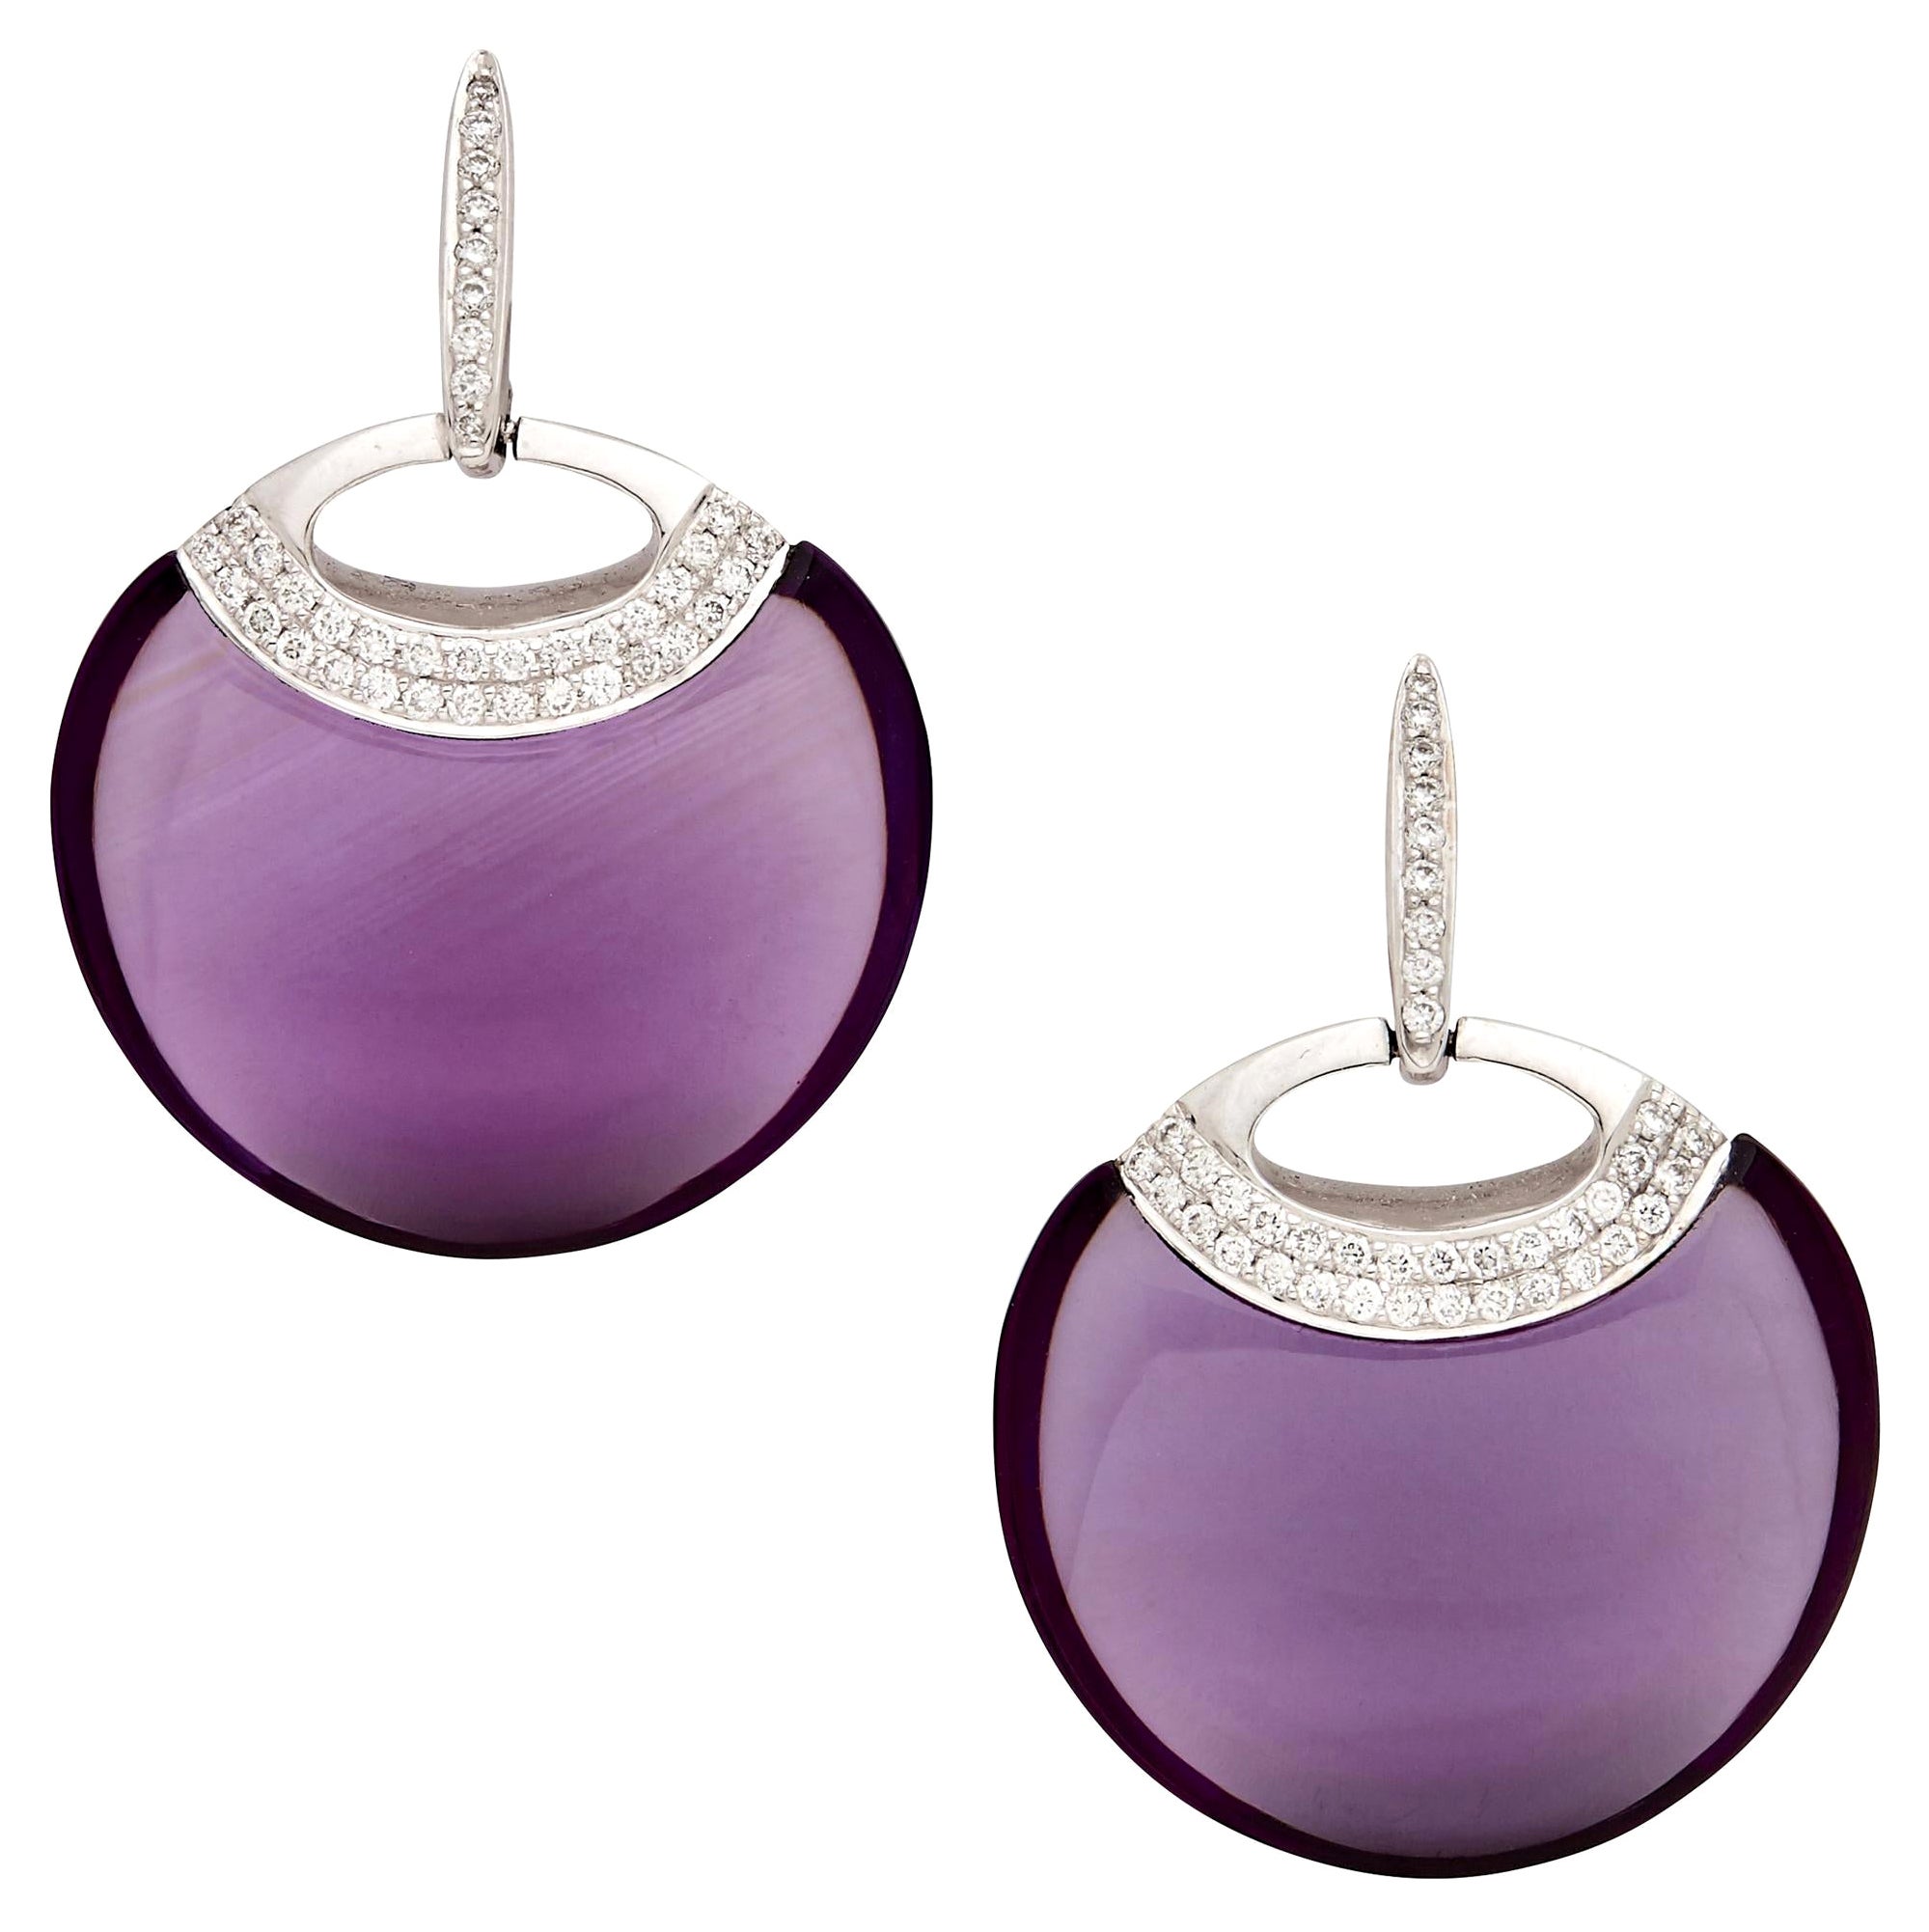 18 Karat White Gold Drop Dangle Earrings with 33.69 Carat Amethysts and Diamonds